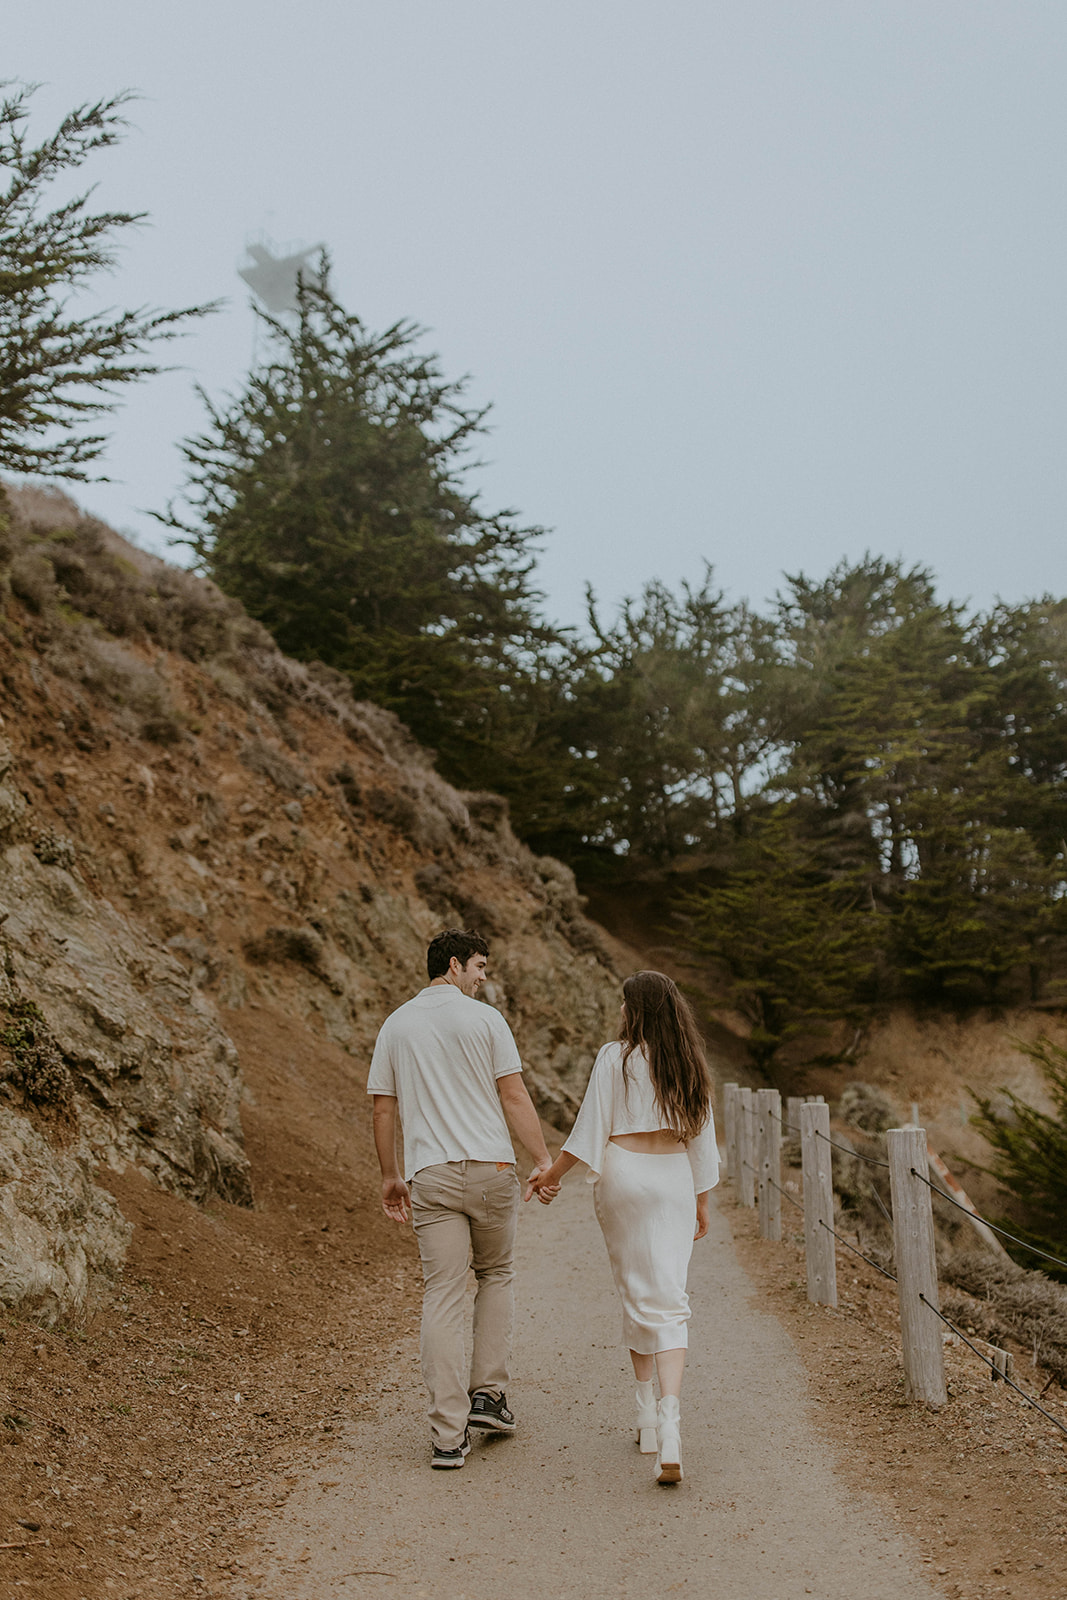 Seaside engagement photos and romantic couples photos. Photo taken by Codi Baer Photography. 